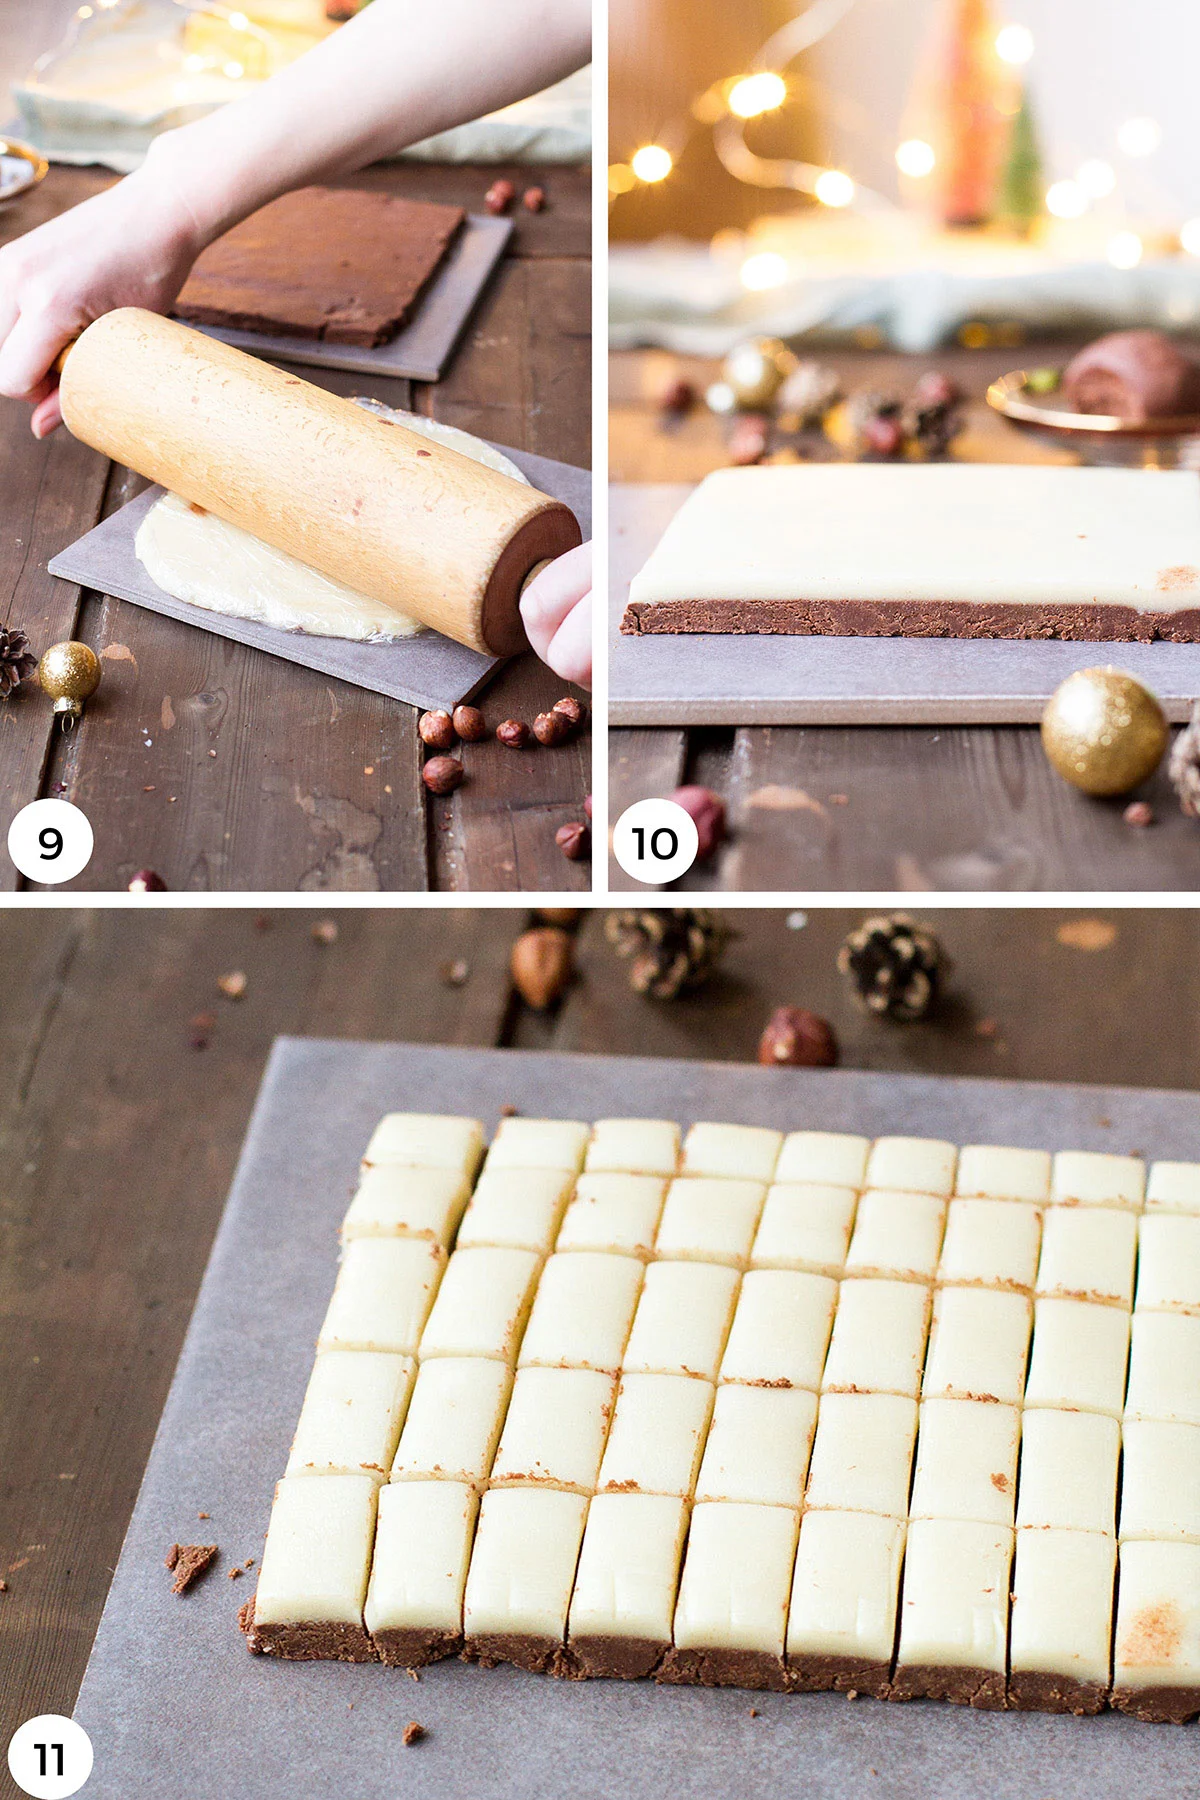 How to roll and shape pralines.